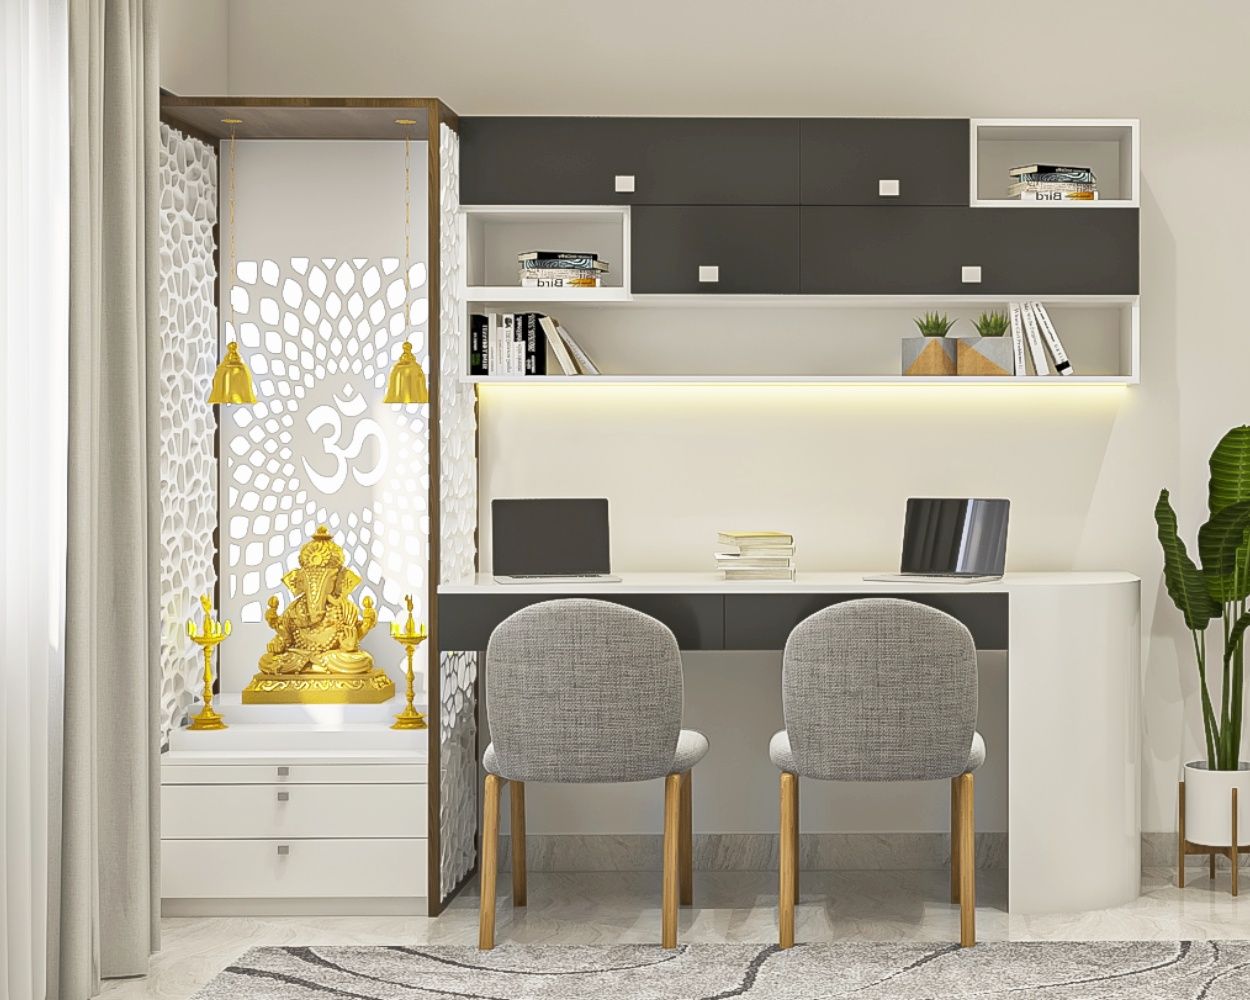 Contemporary Frosty White And Crescent Acacia Mandir Unit Design With Study Table